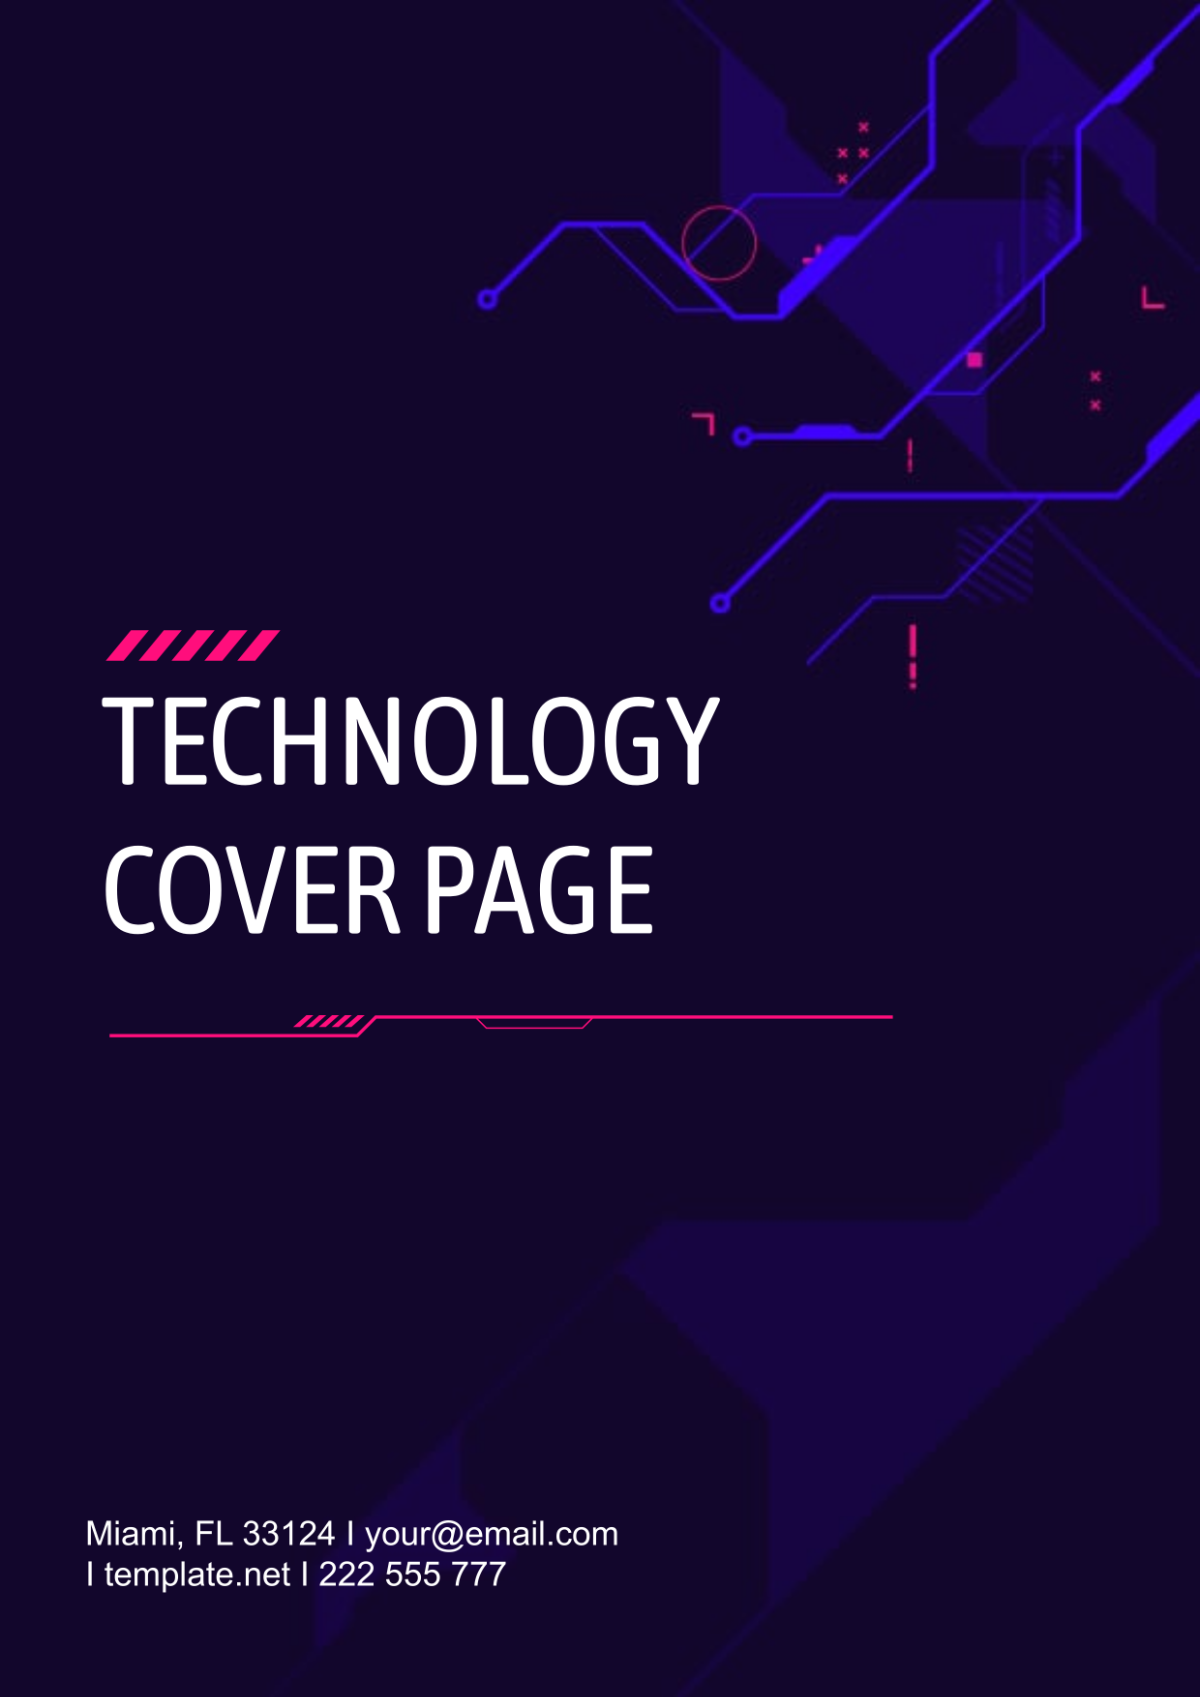 Technology Cover Page Image  Template